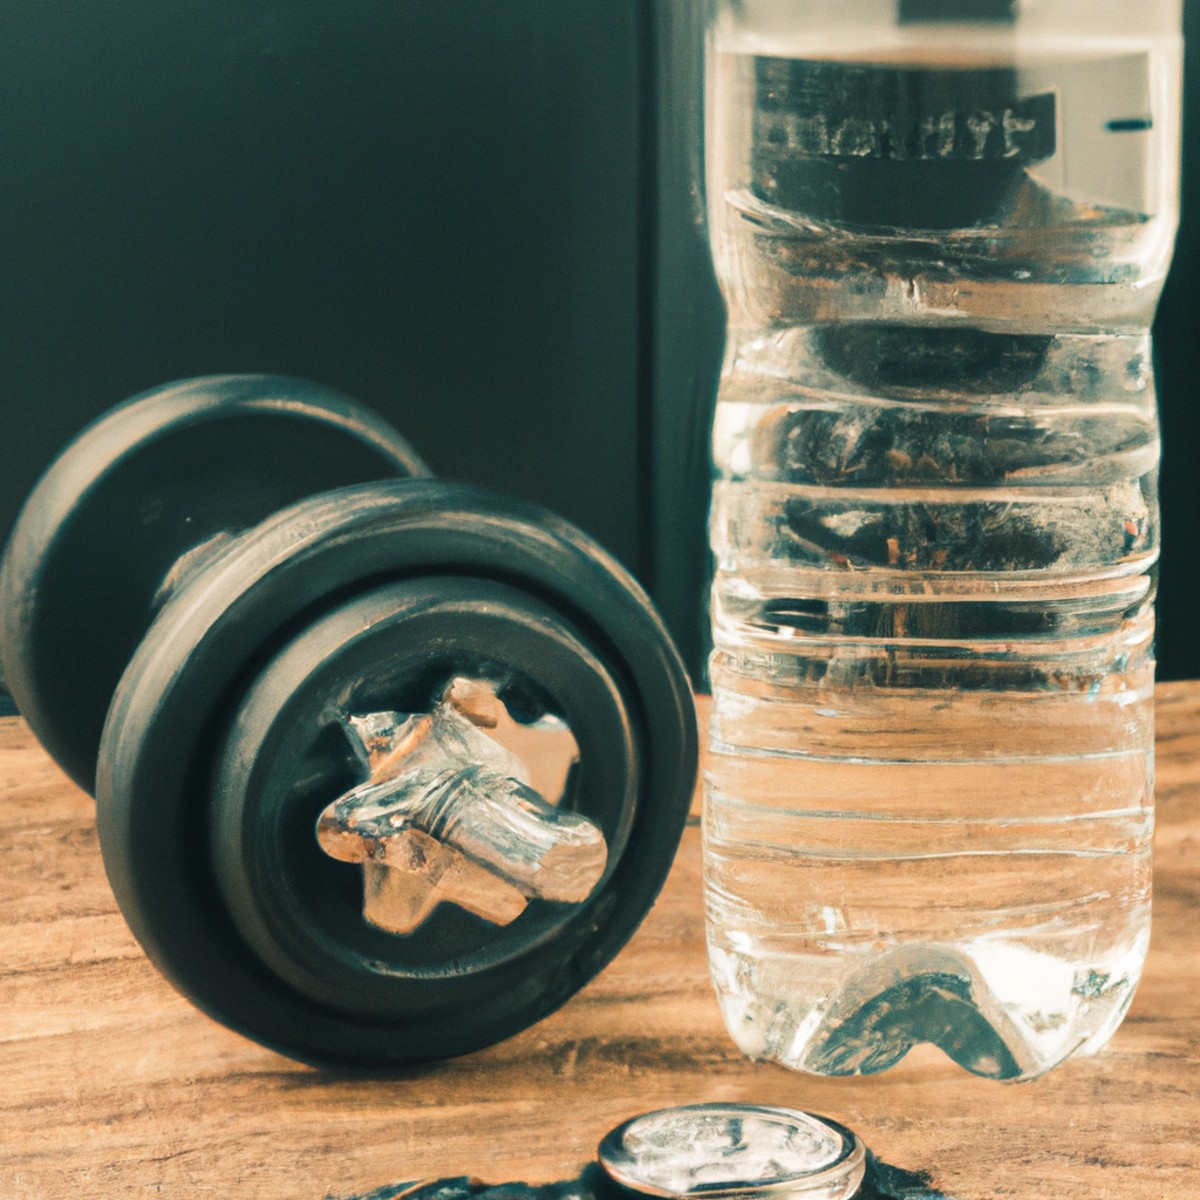 The photo shows a sleek black fitness watch placed on top of a wooden table, next to a set of silver dumbbells and a glass of water. The watch face displays the time and a progress bar indicating the user's fasting period. The dumbbells are positioned neatly, with the weight plates facing outward. The glass of water is half-full, with droplets of condensation on the outside. The lighting is bright and natural, casting a soft shadow of the watch and dumbbells on the table. The photo captures the essence of the article, emphasizing the importance of timing workouts and fasting for optimal health and fitness.##Intermittent fasting